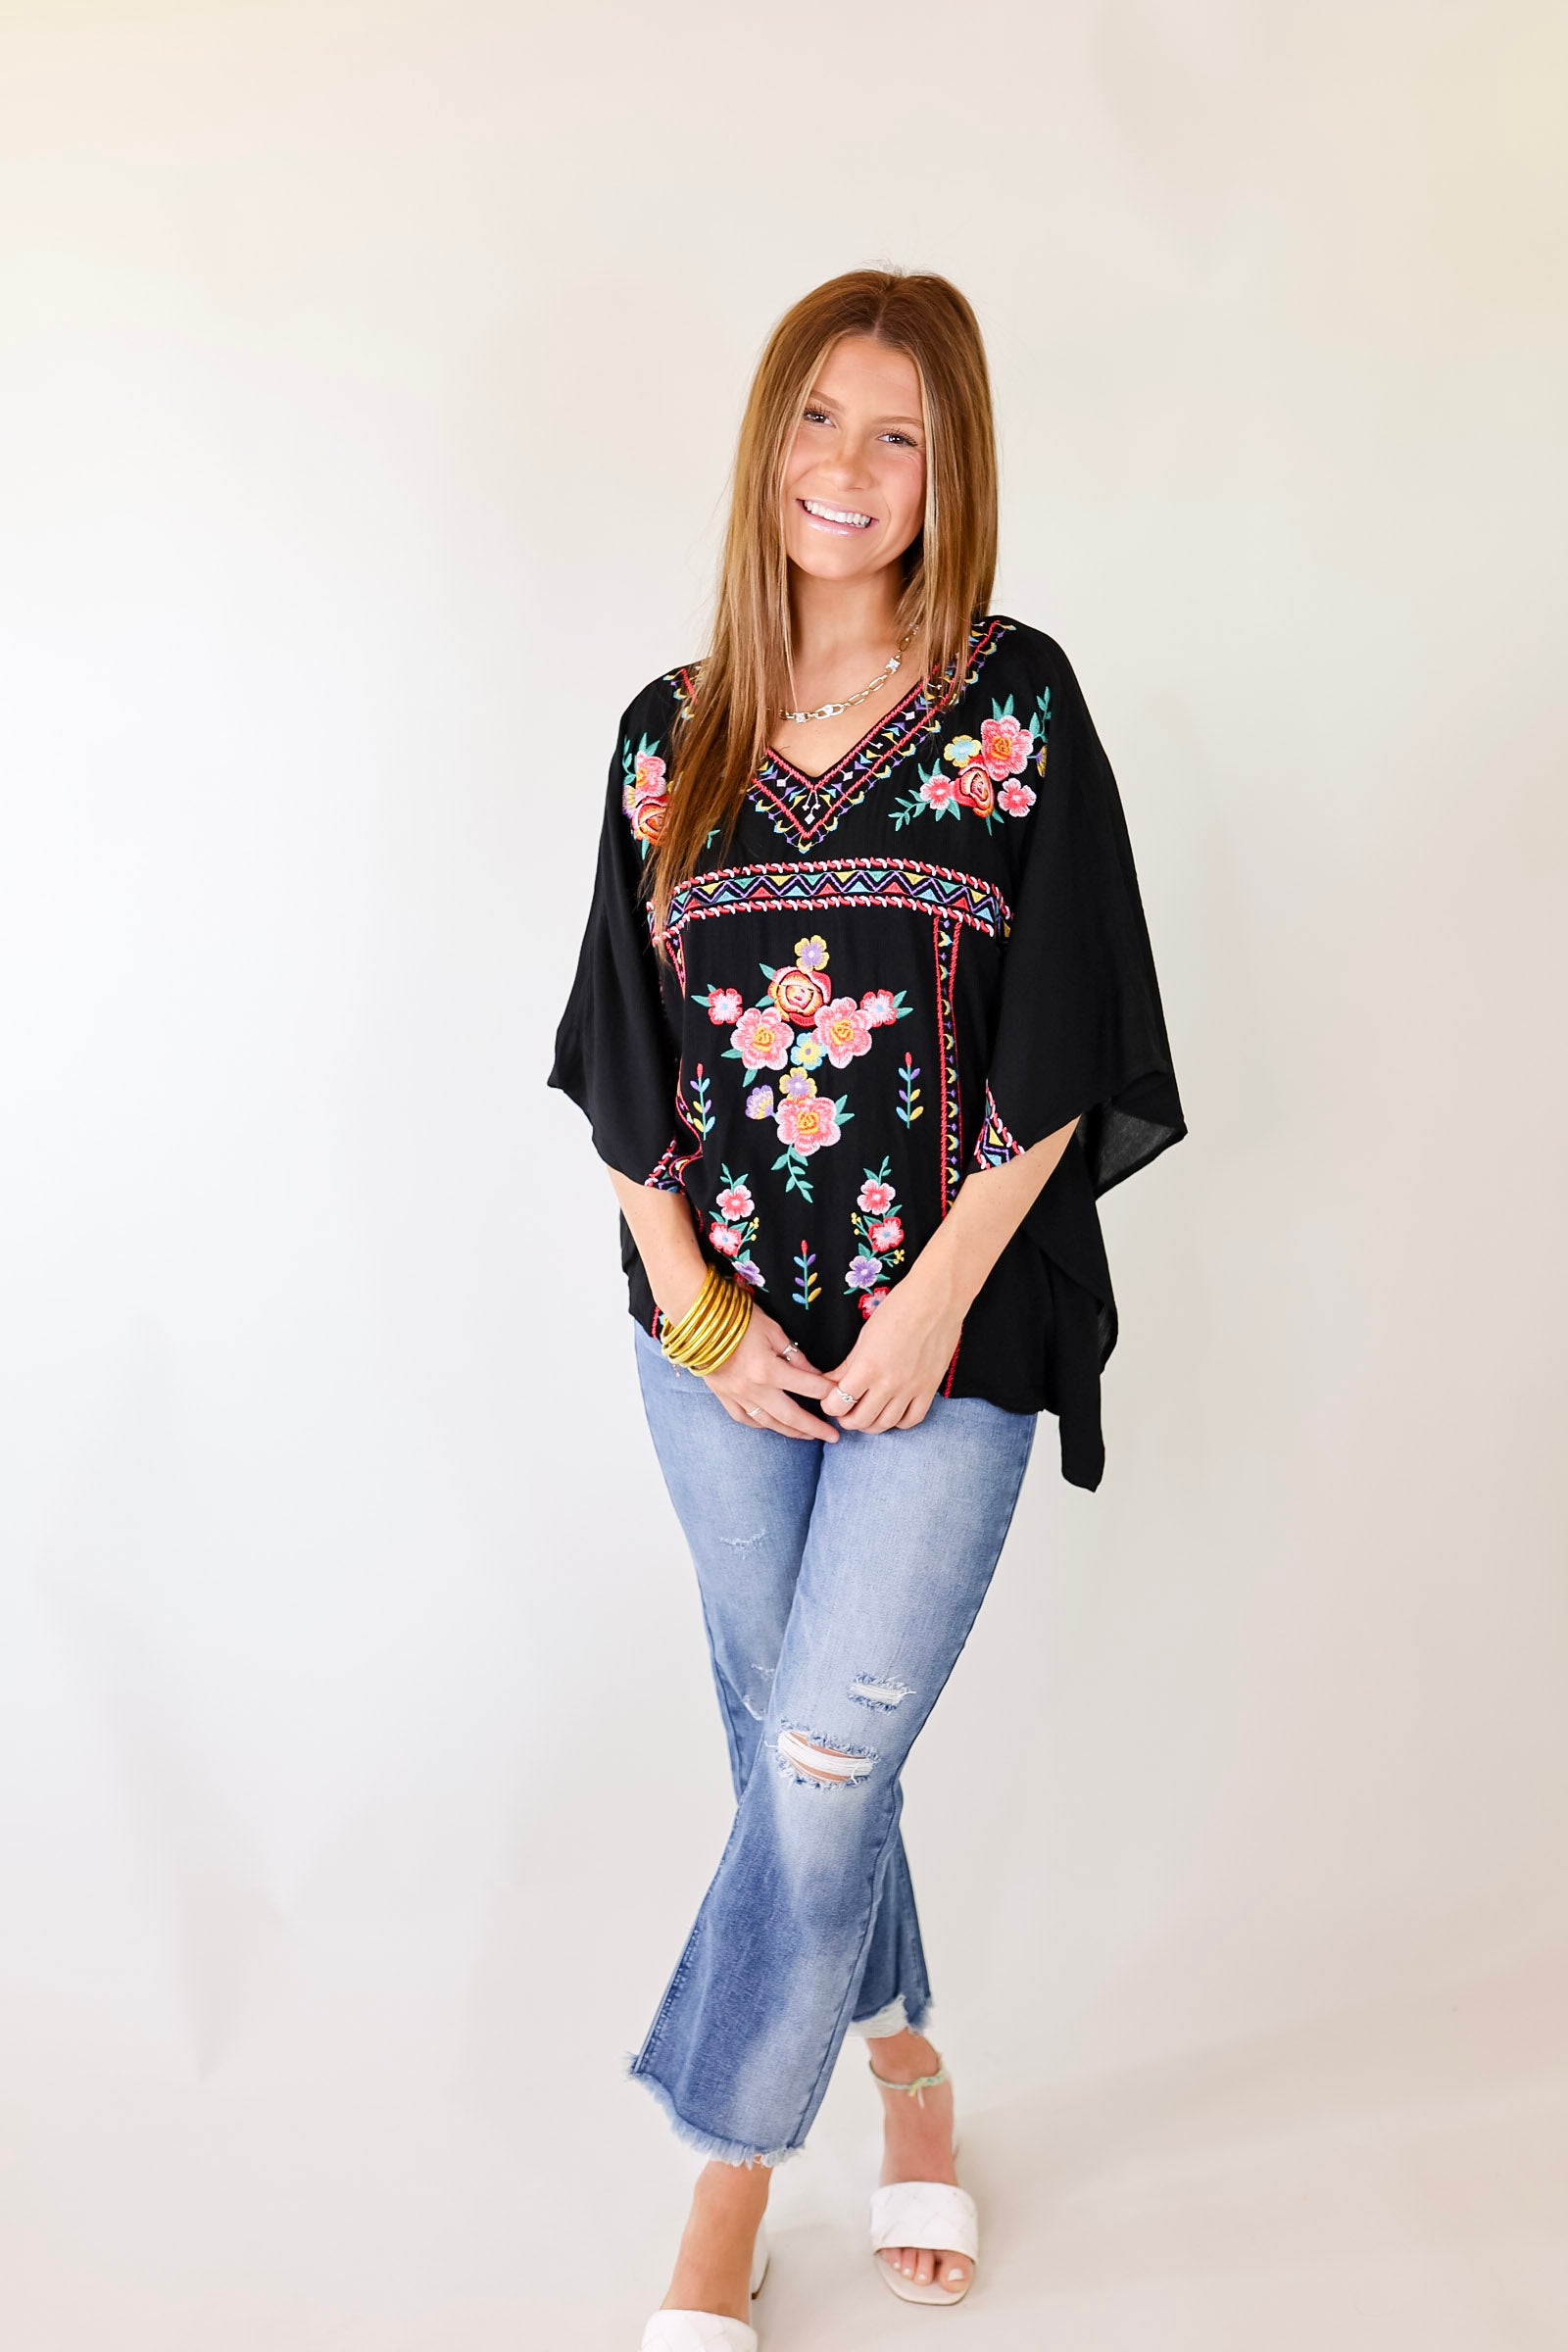 Beautiful Borders Half Sleeve V Neck Floral Embroidered Top in Black - Giddy Up Glamour Boutique